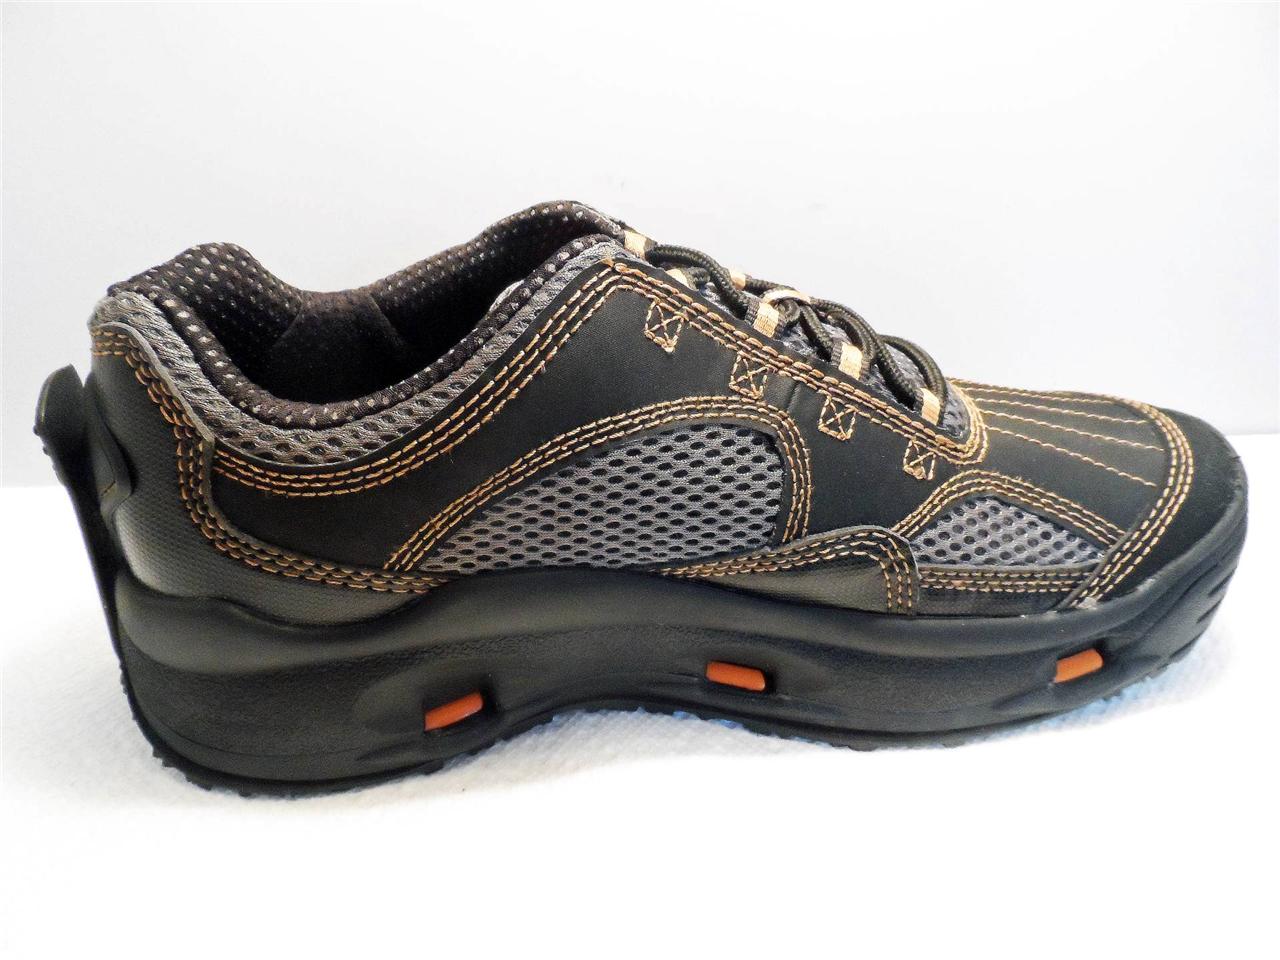 Korkers BoxCar Wading Shoes, Water Shoes, Boat Shoes - FlyMasters | eBay